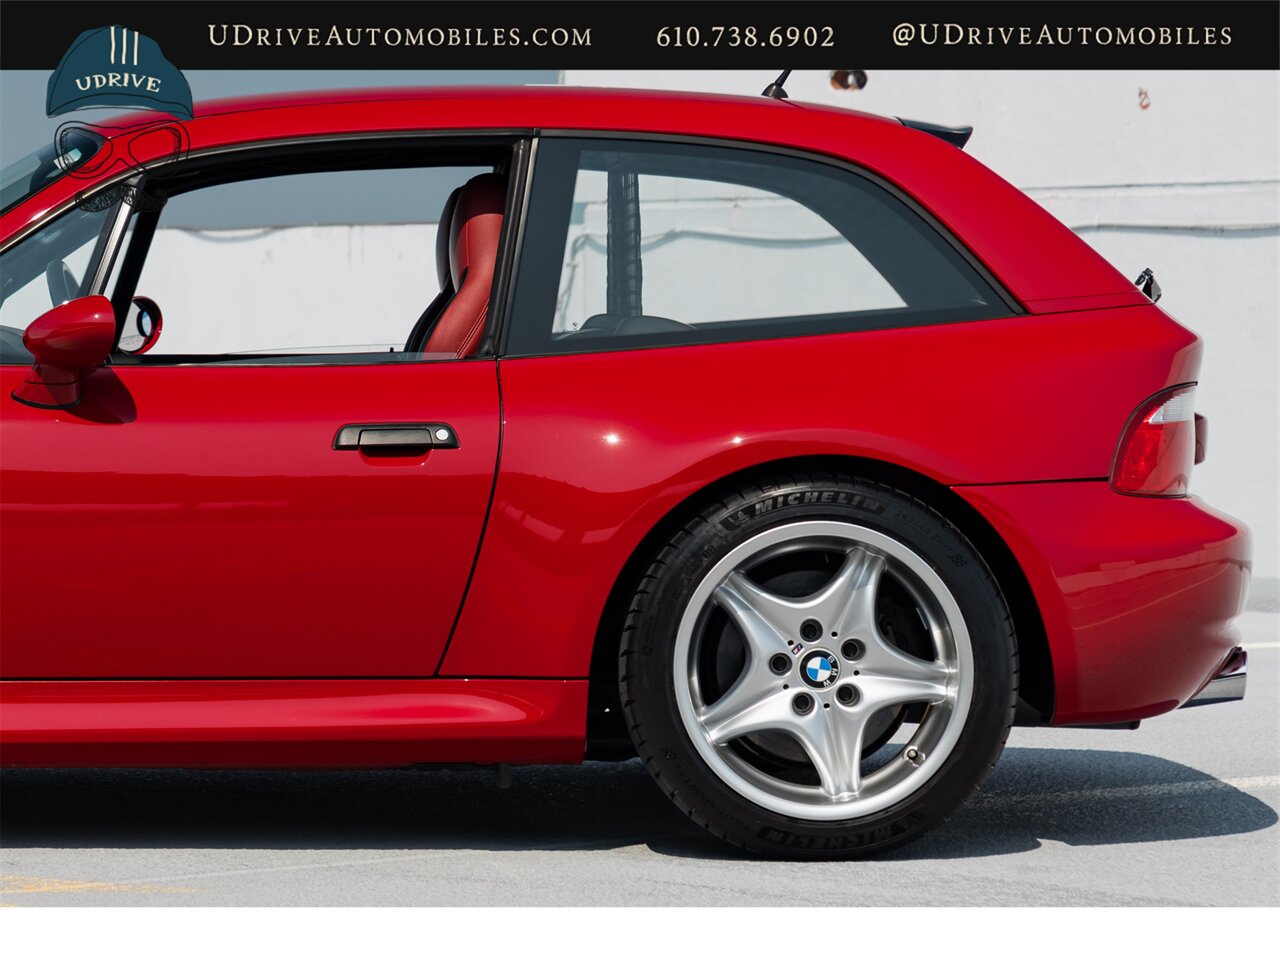 2000 BMW Z3 M  Coupe 25k Miles  Sunroof Delete $4k Recent Service - Photo 26 - West Chester, PA 19382